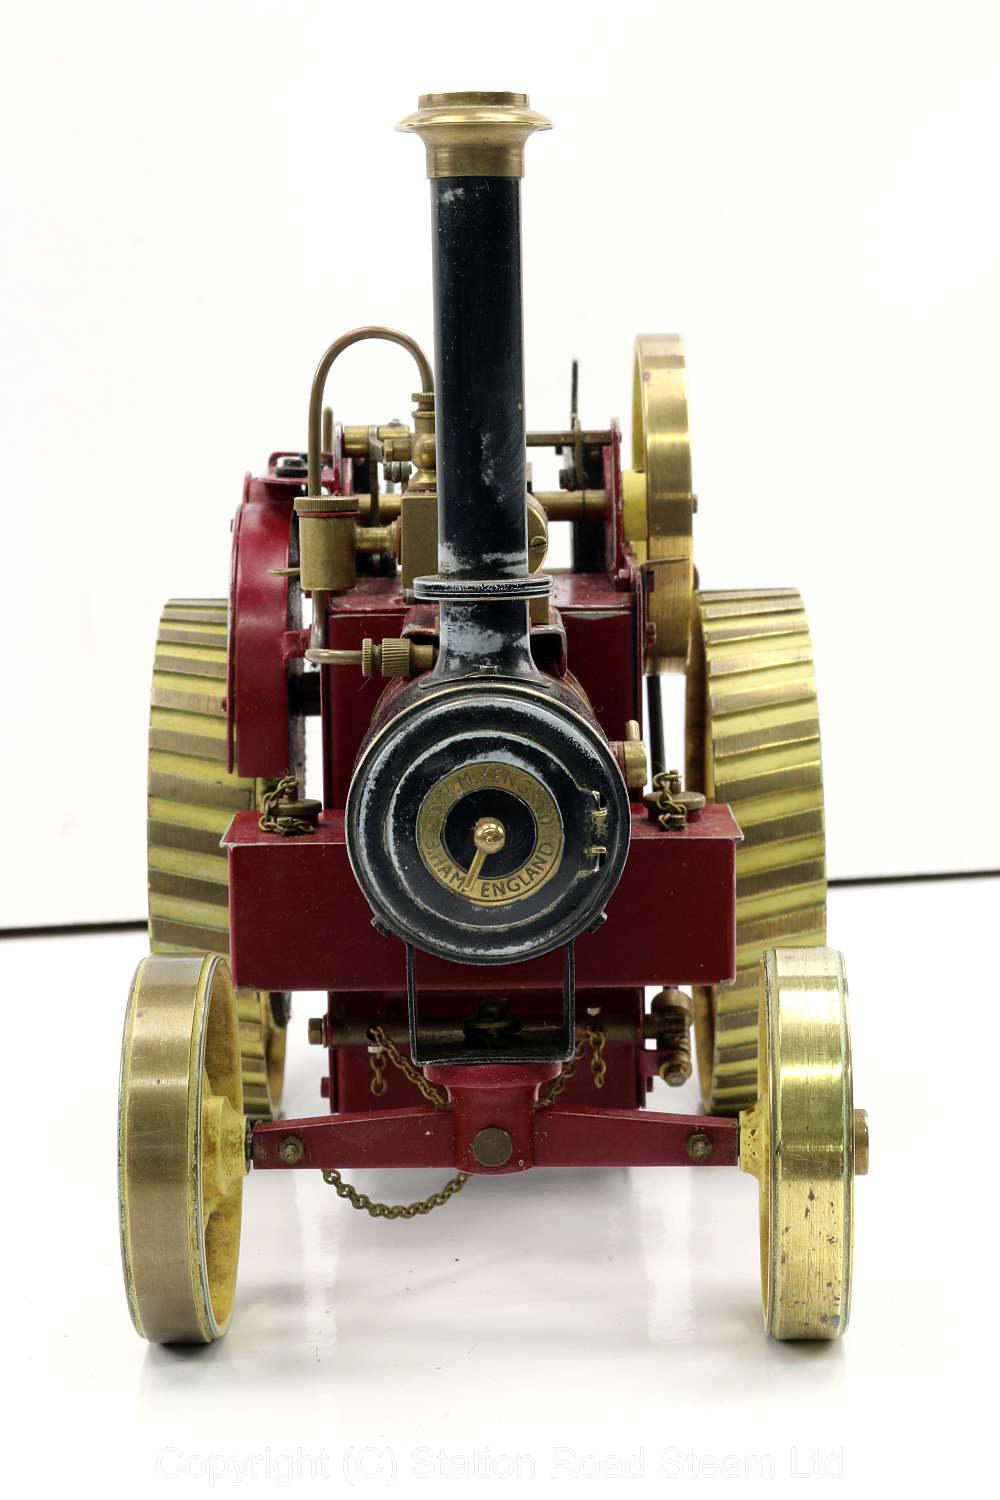 3/4 inch scale Mercer agricultural engine